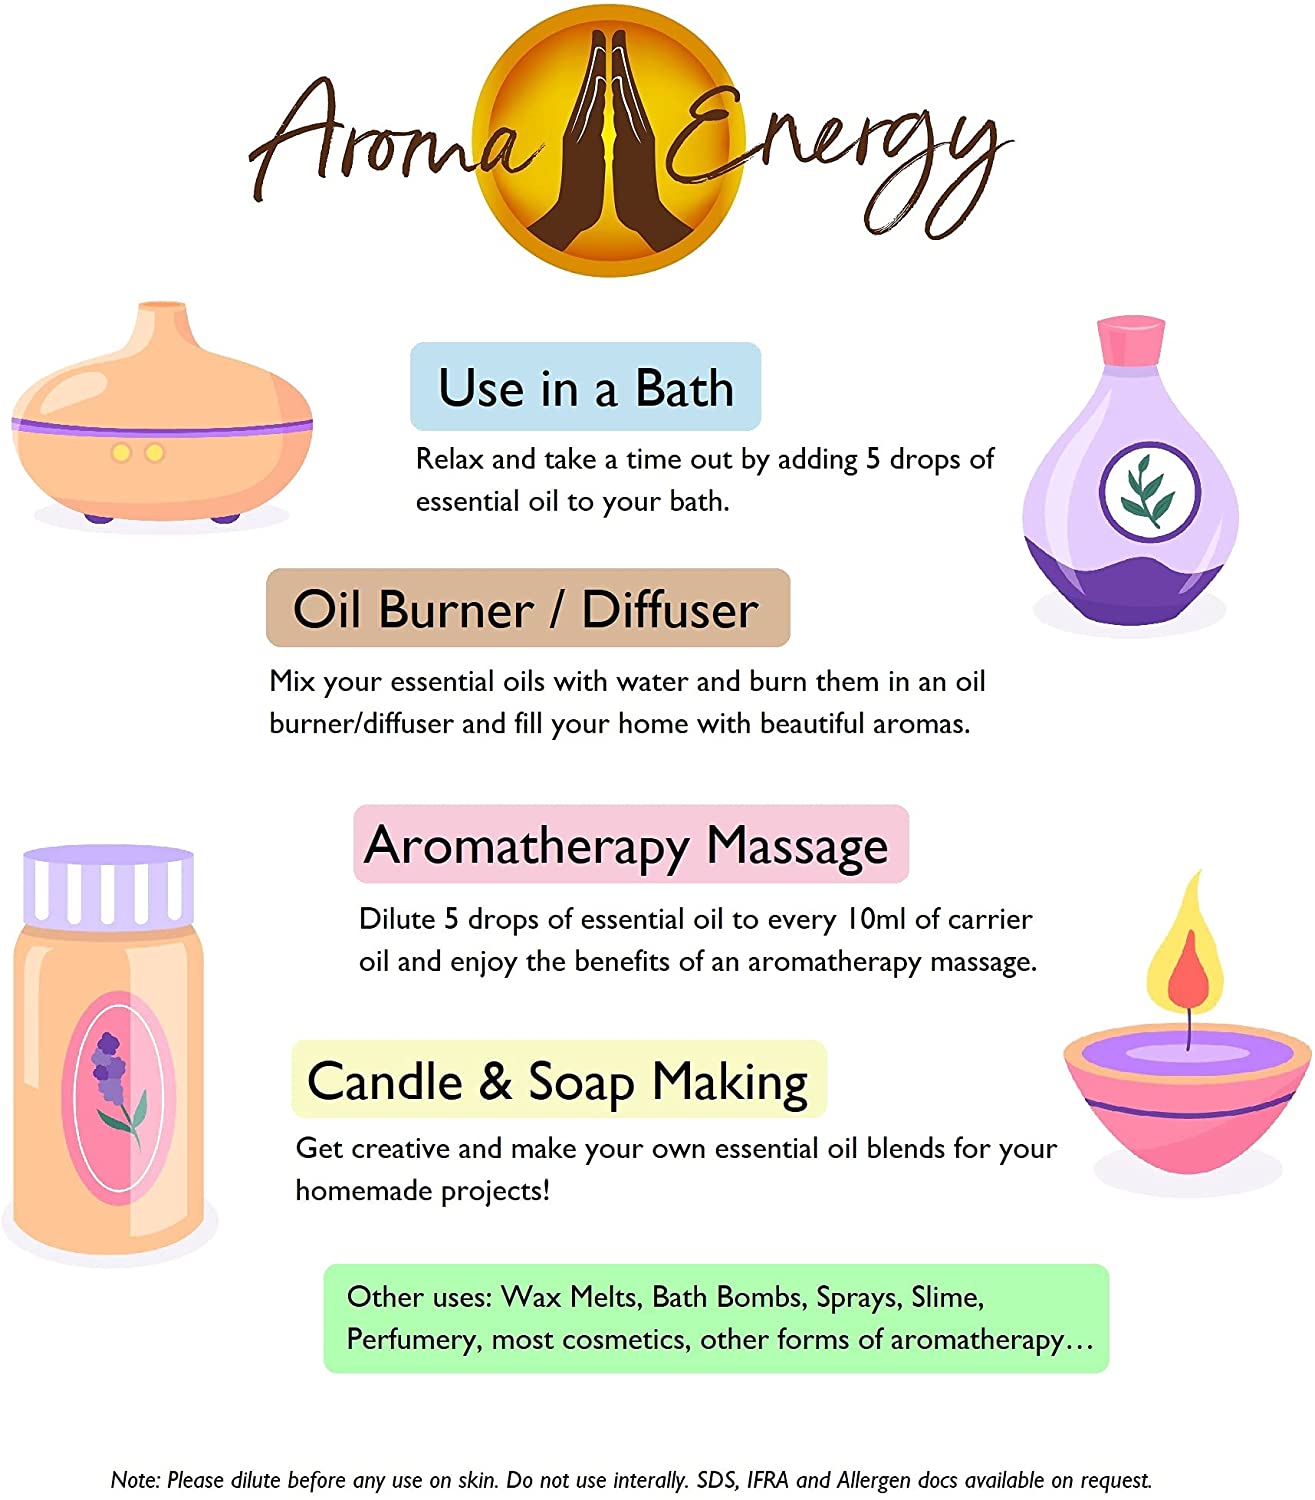 Anxiety Life Essential Oil - Aroma Energy